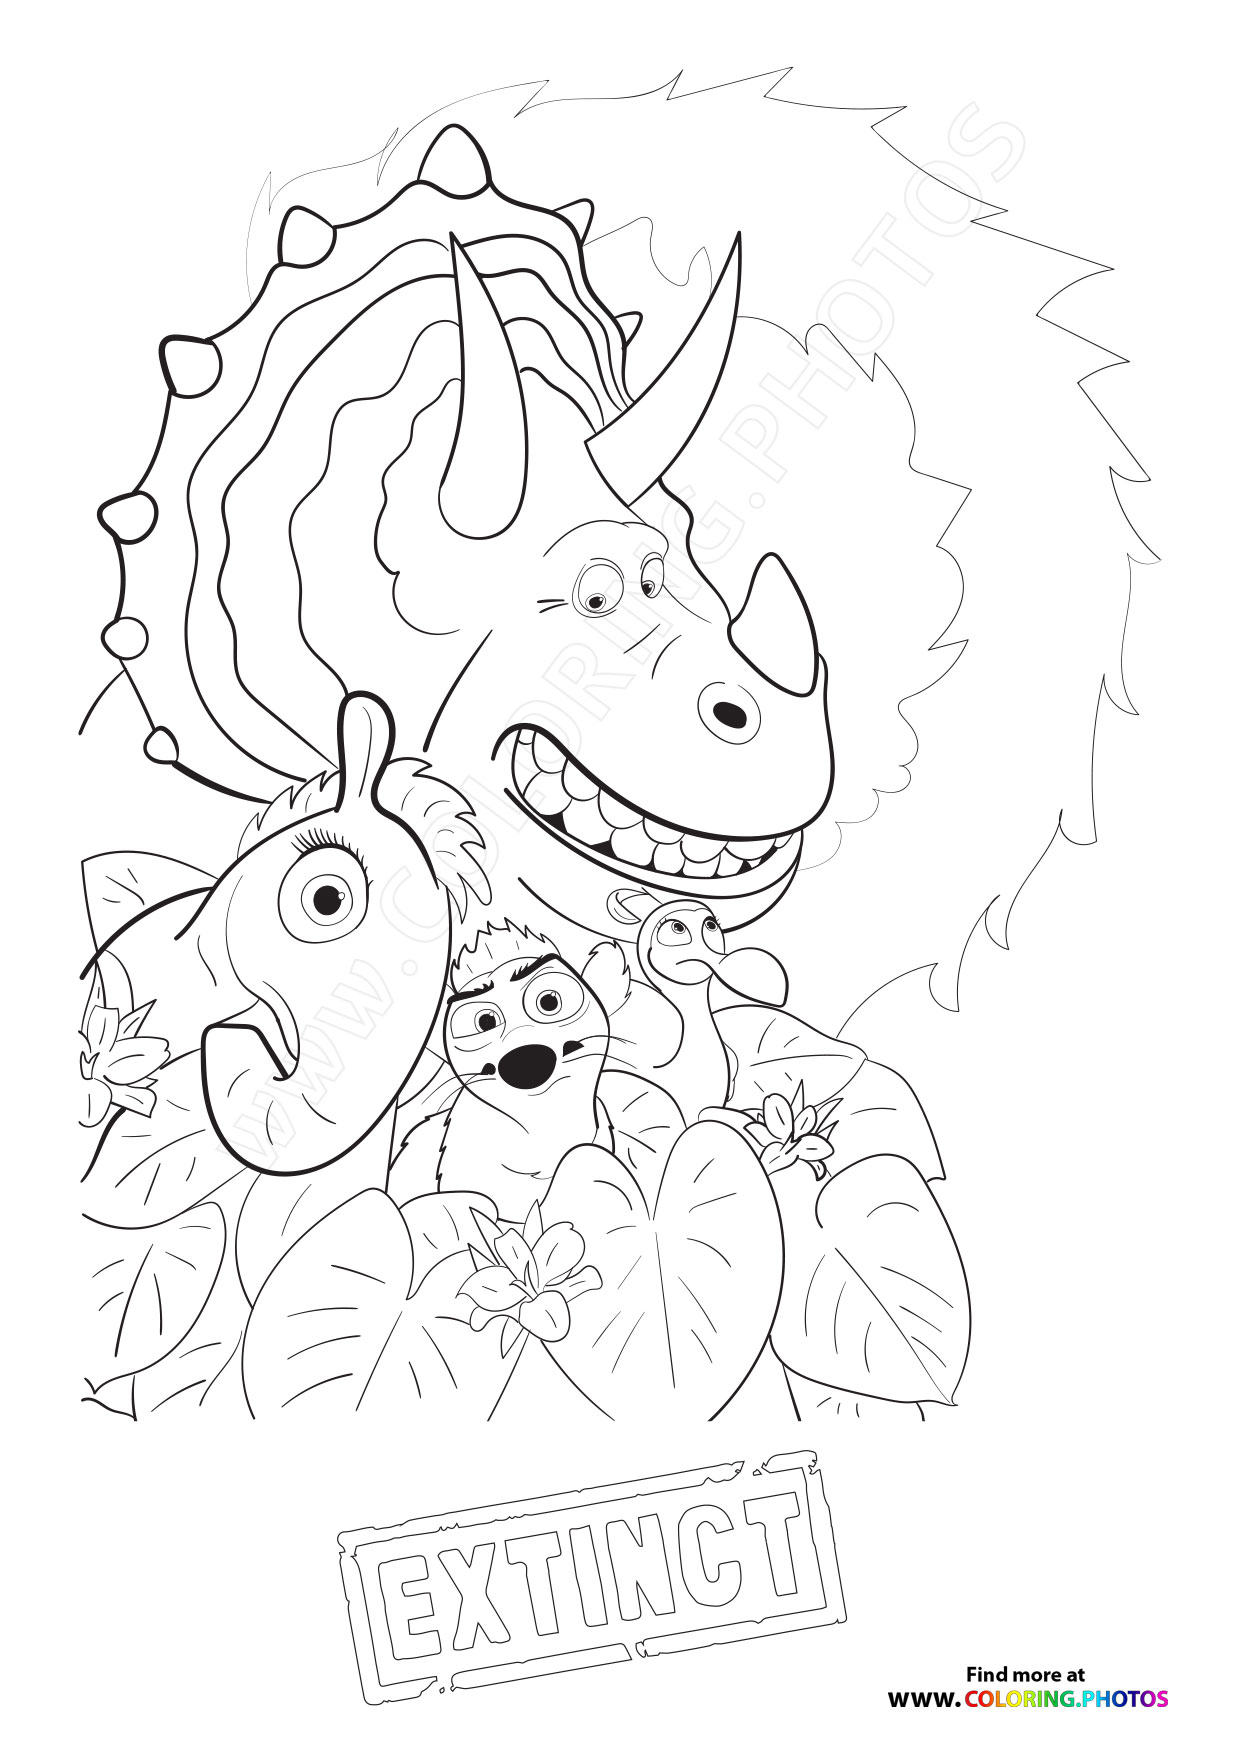 Animals from Extinct   Coloring Pages for kids